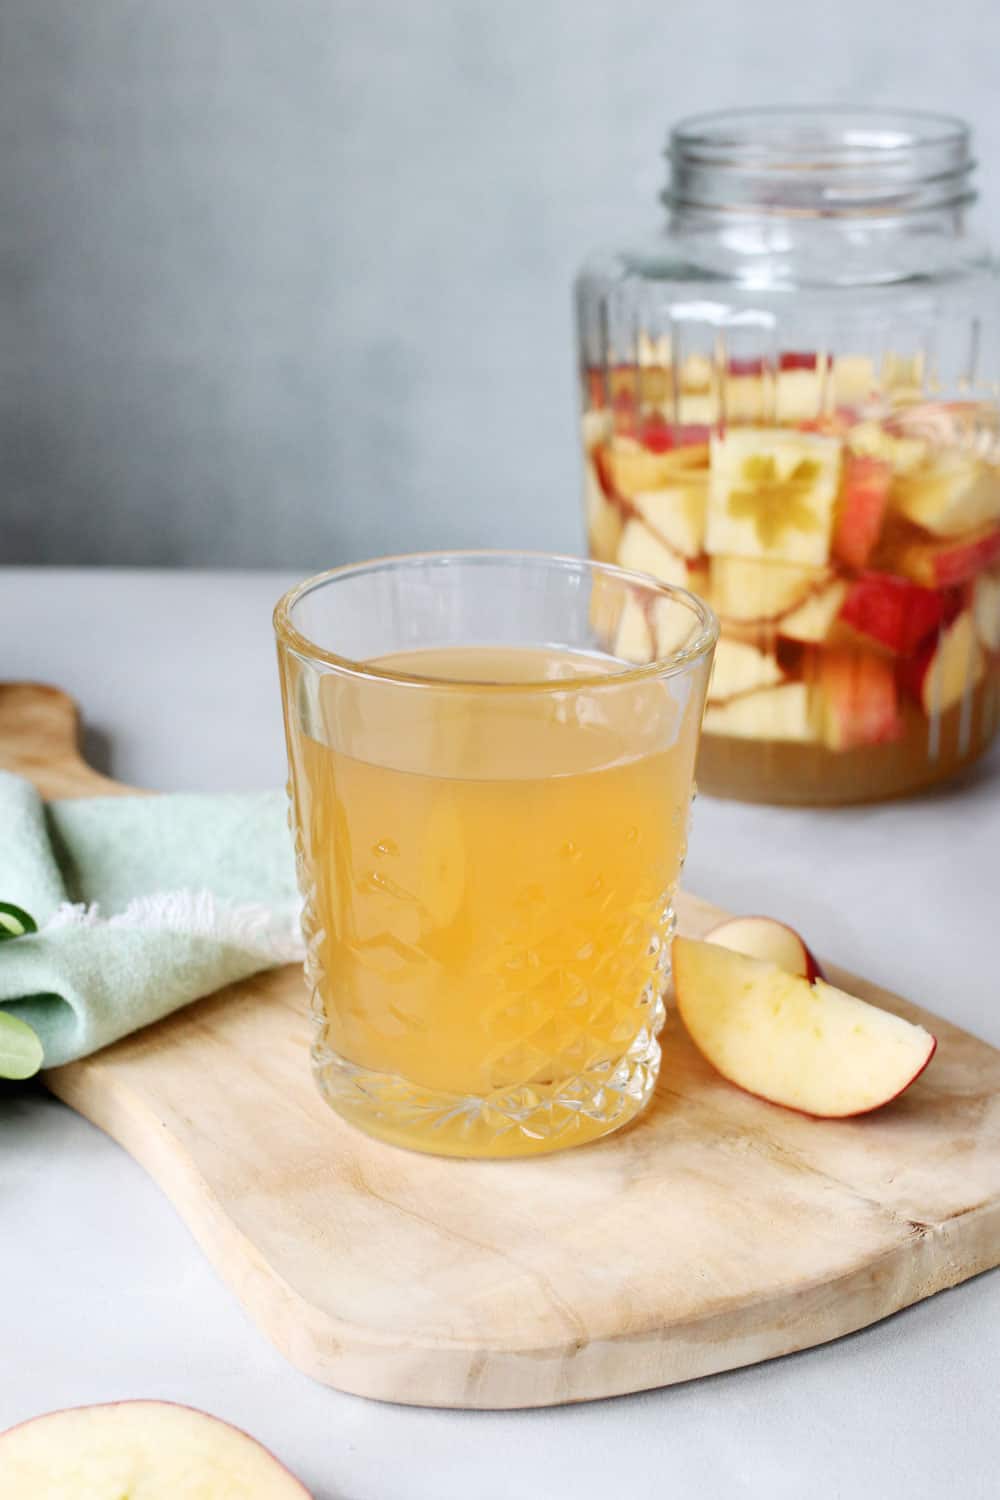 Yes, You Can Make Your Own Apple Cider Vinegar! Here's How.